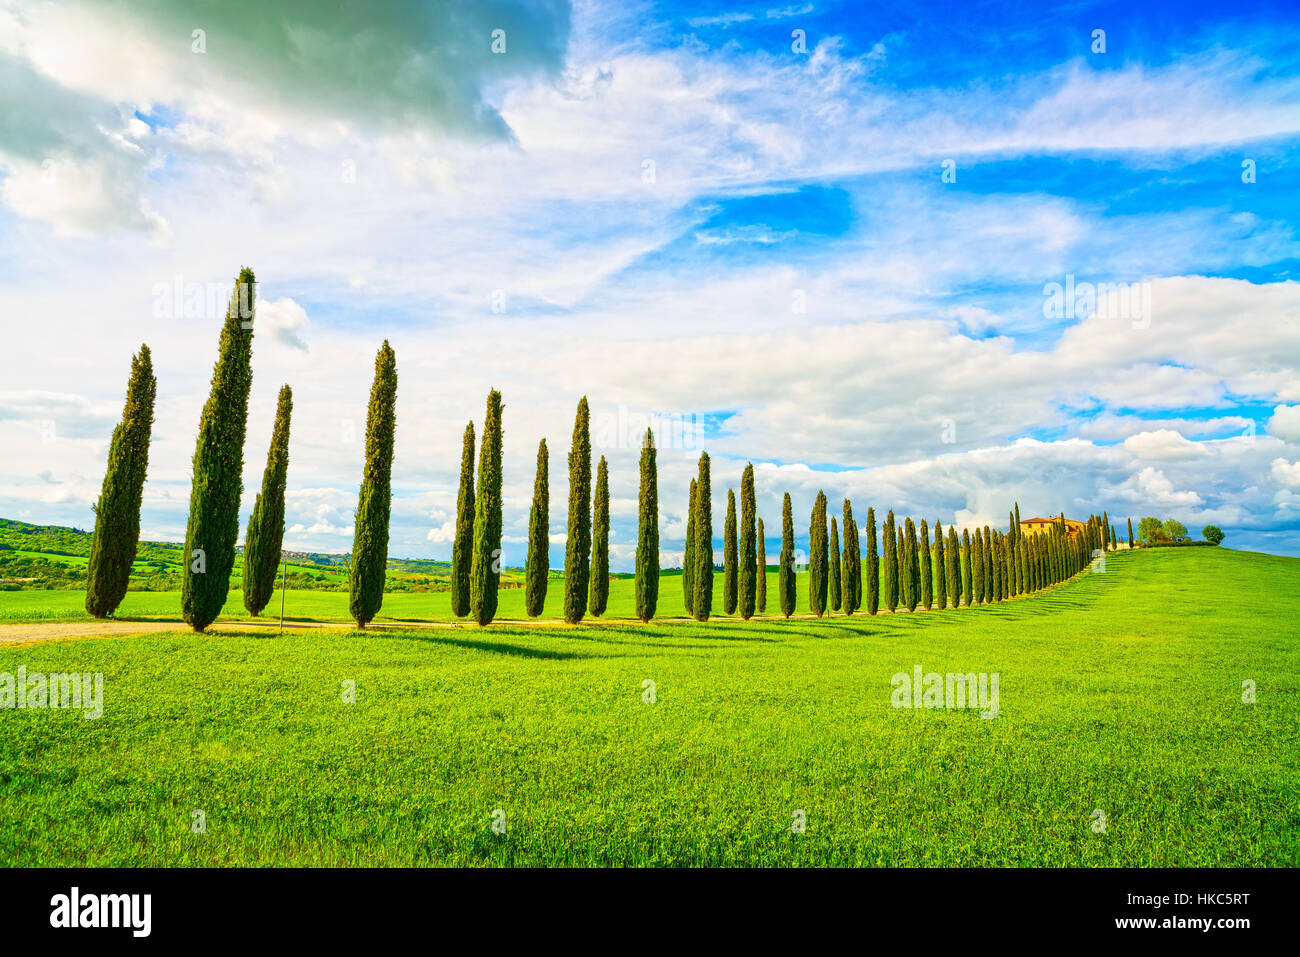 Tuscany, farmland, cypress trees row and plowed field, country landscape. Siena, Val d Orcia, Italy, Europe. Stock Photo